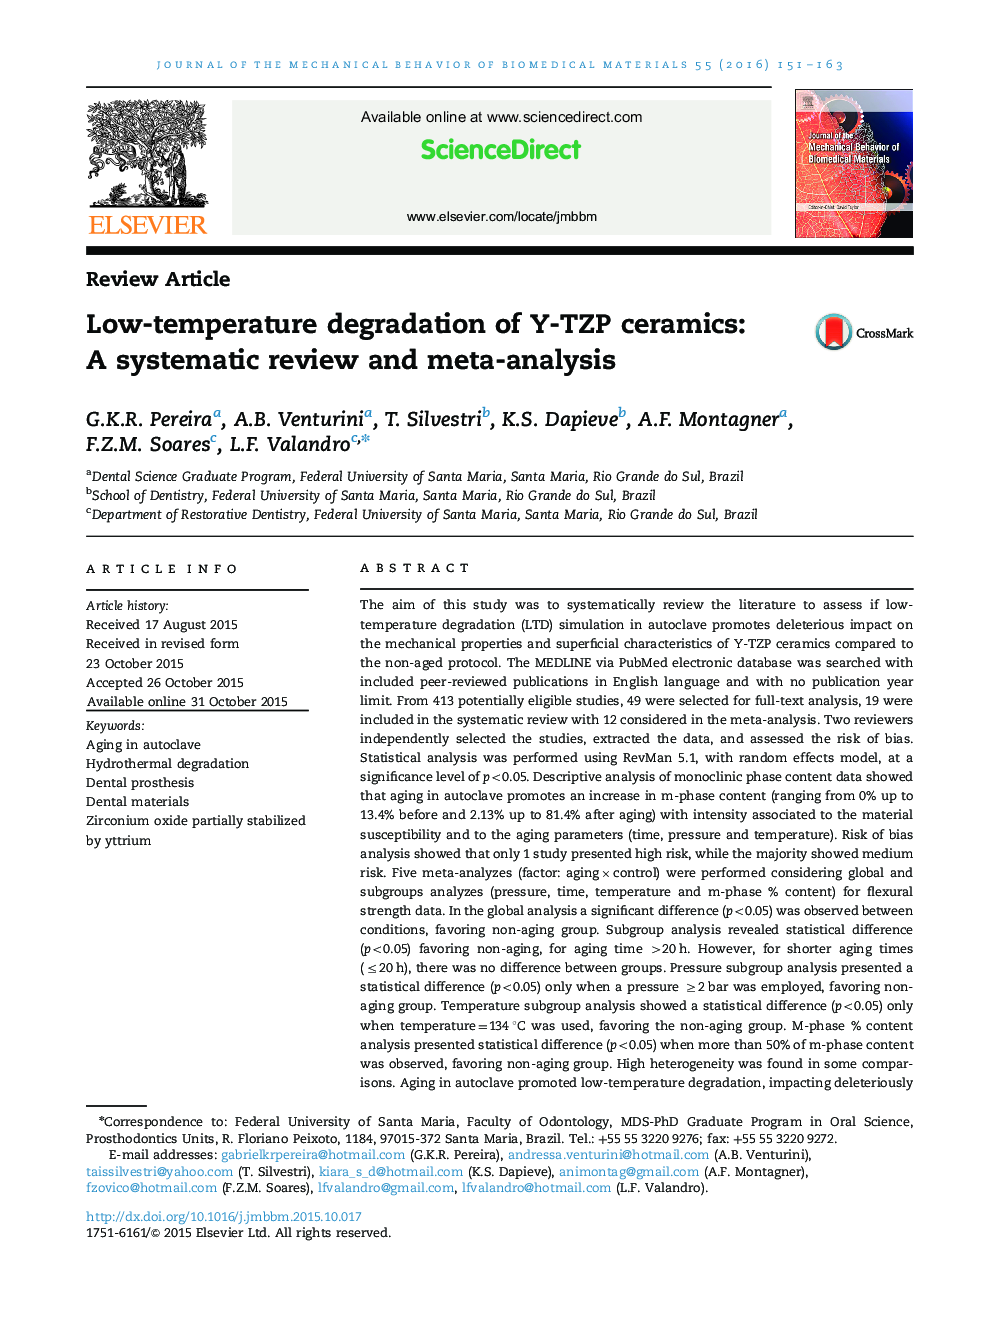 Low-temperature degradation of Y-TZP ceramics: A systematic review and meta-analysis